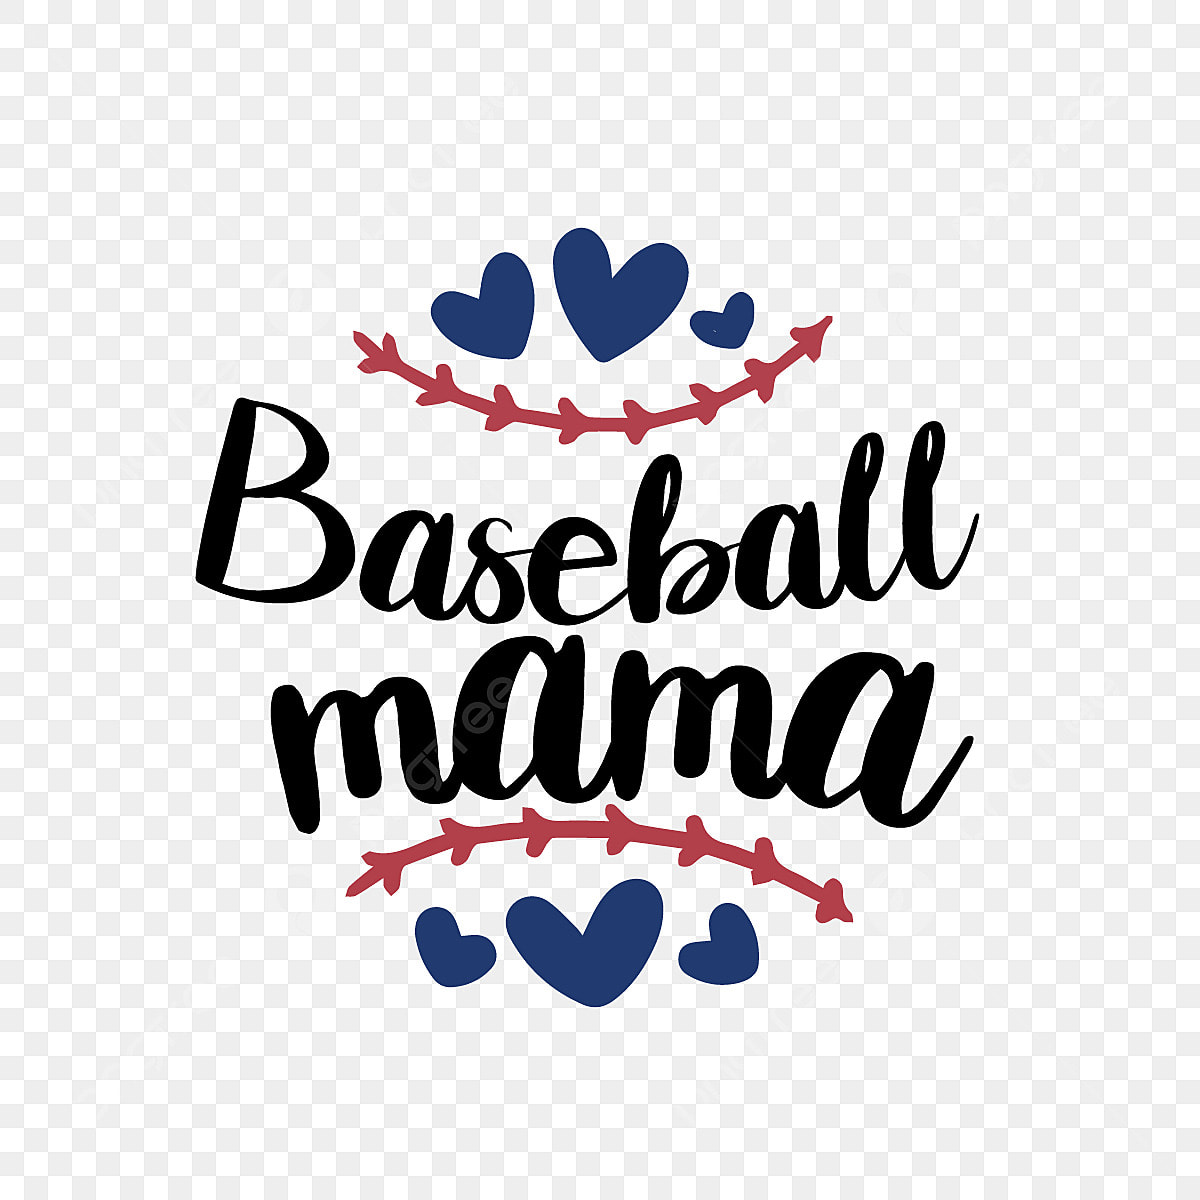 Baseball mom png vector psd and clipart with transparent background for free download